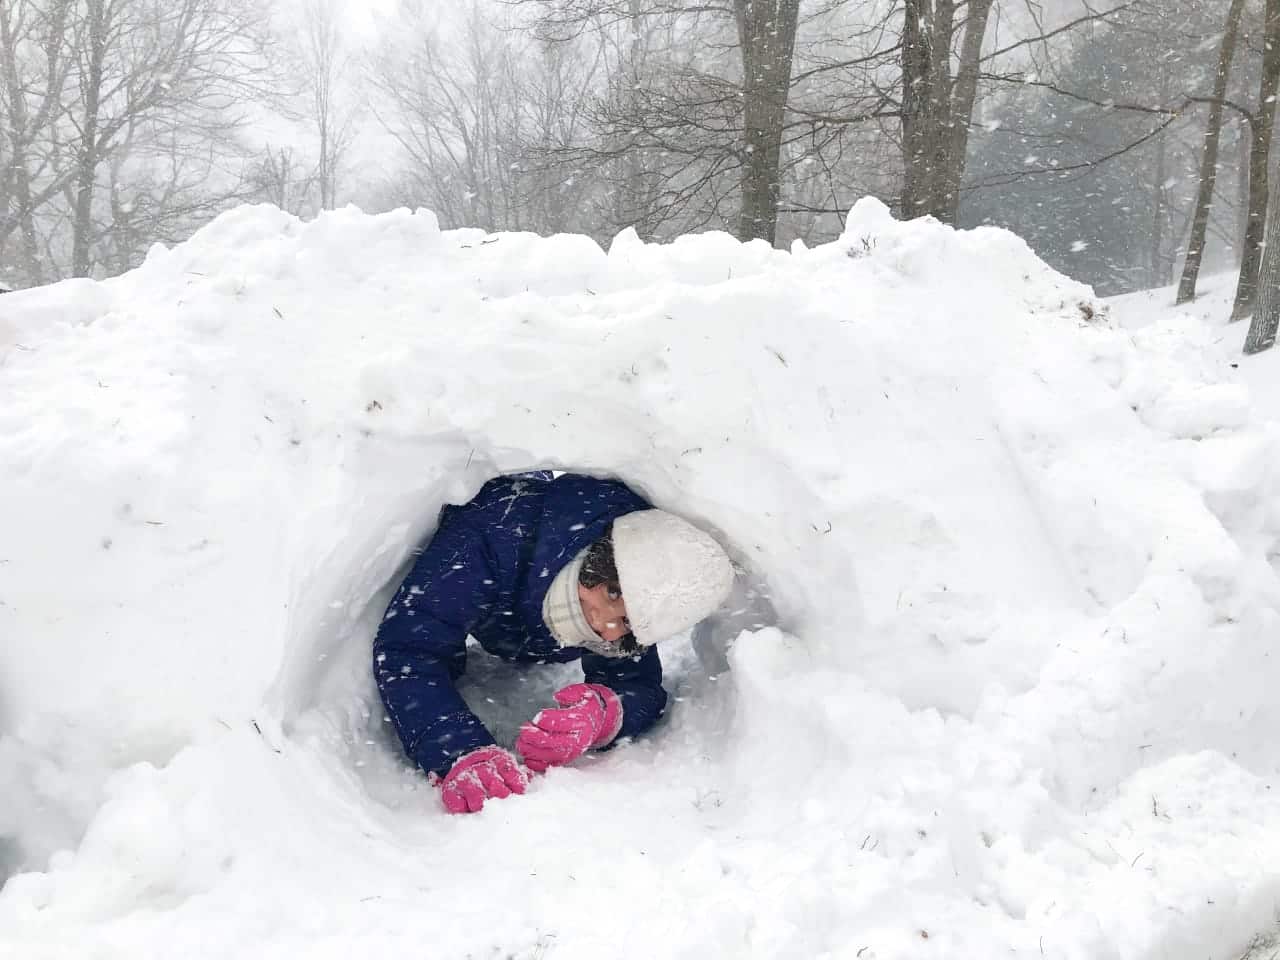 This Northern Westchester youngster had more than enough white stuff to have fun in the snow in Armonk.